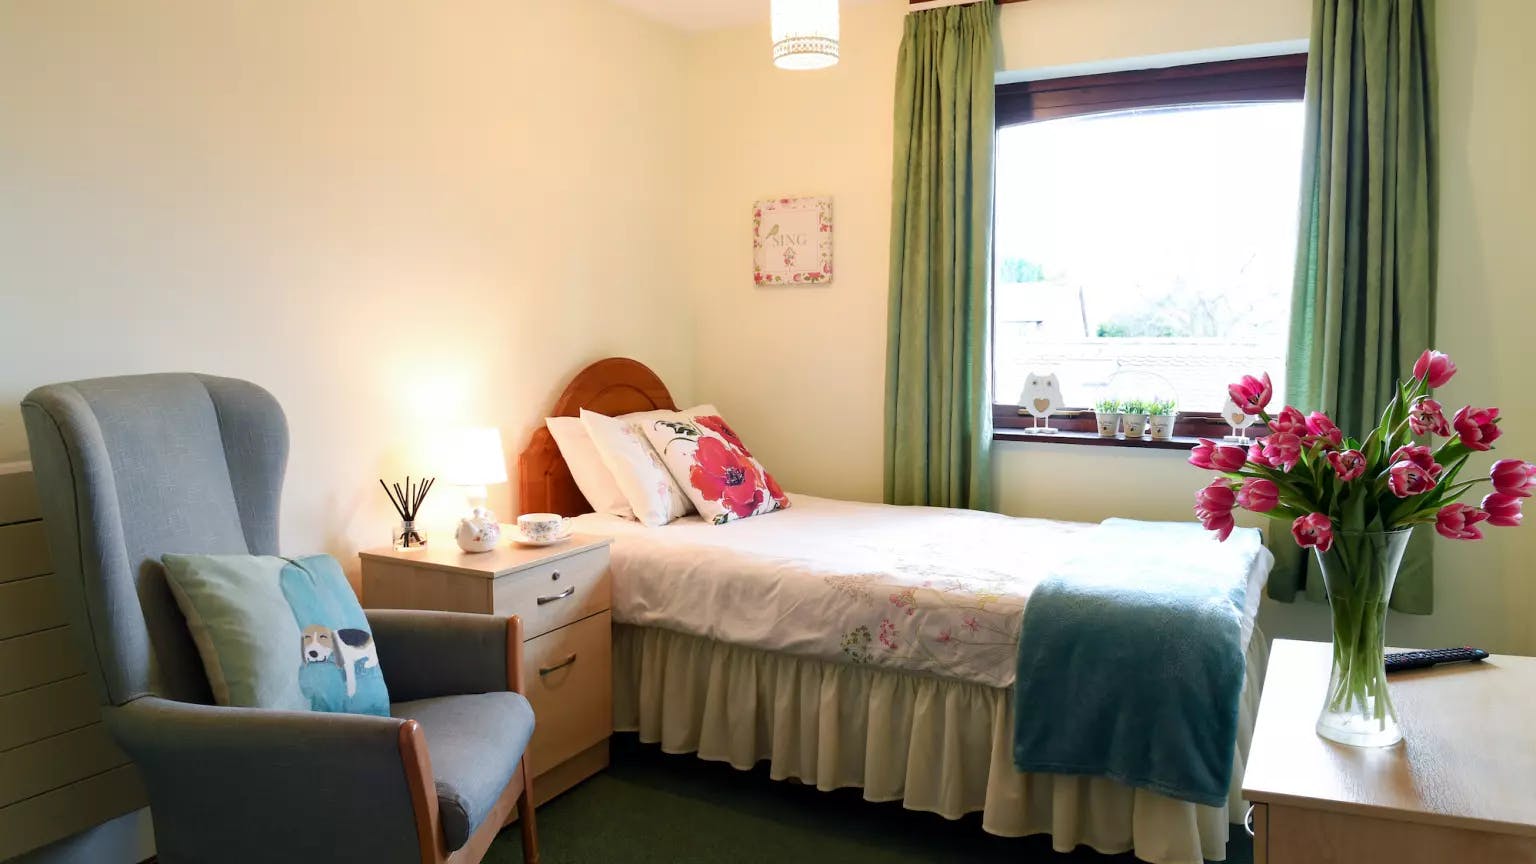 Bedroom Richard Cox House care home in Royston, Hertfordshire